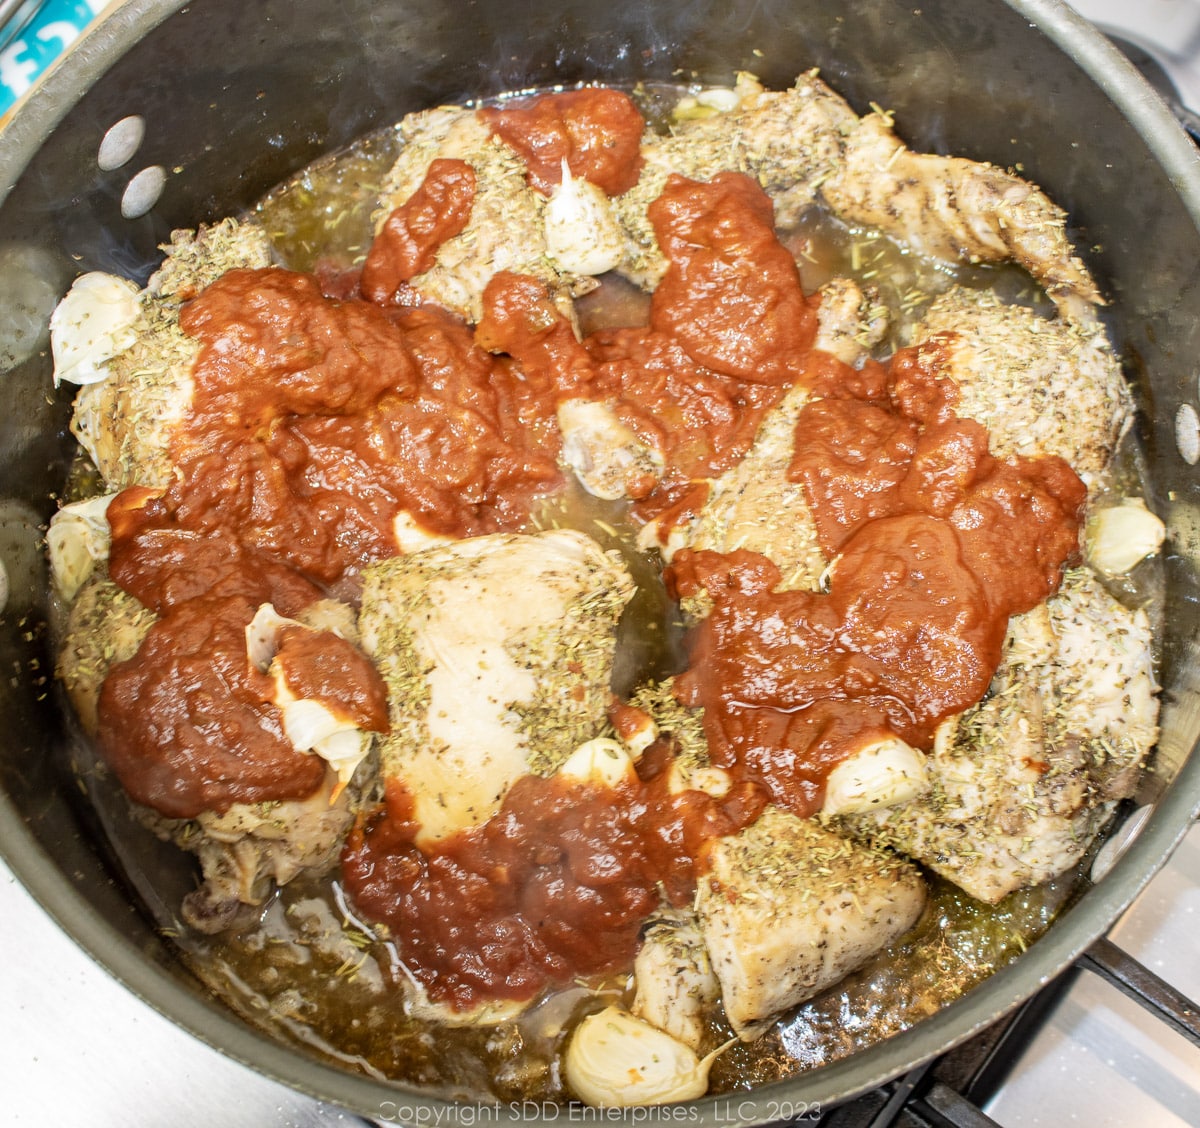 White wine and Red Gravy added to seasoned chicken pieces in a Dutch oven.